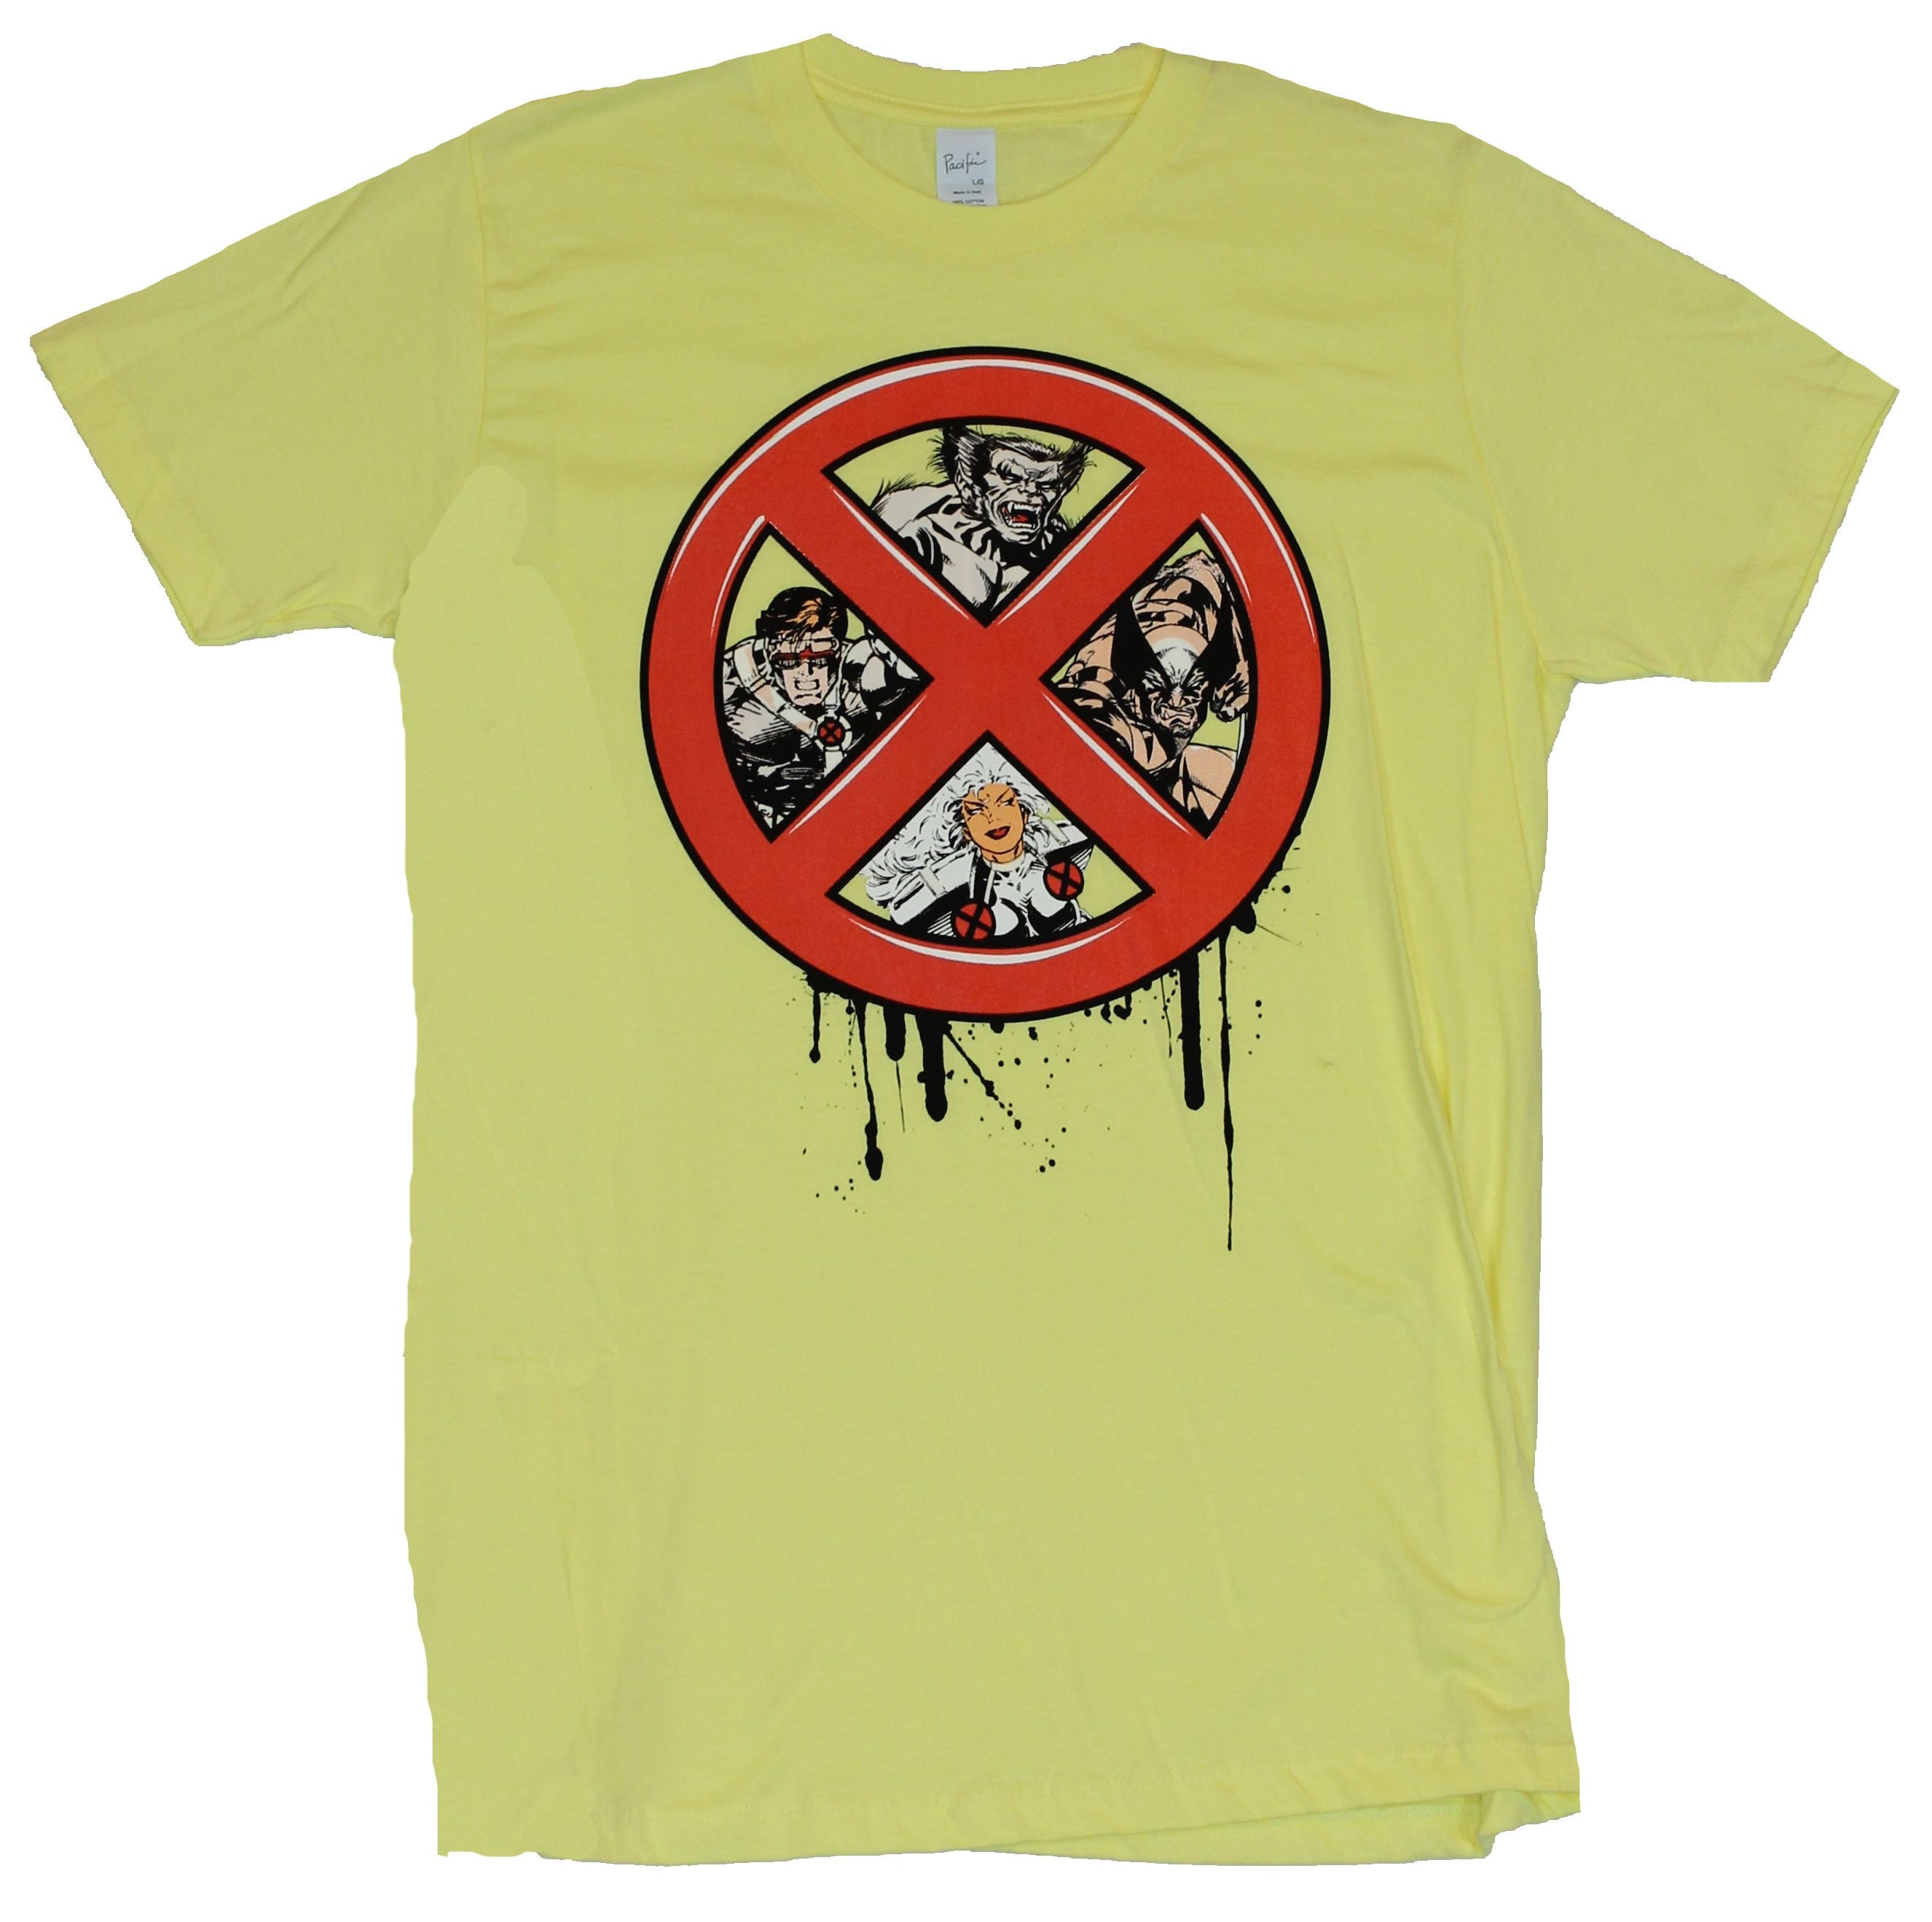 X-Men (Marvel Comics) Mens T-Shirt - X Dripping Logo Filled With hero Images